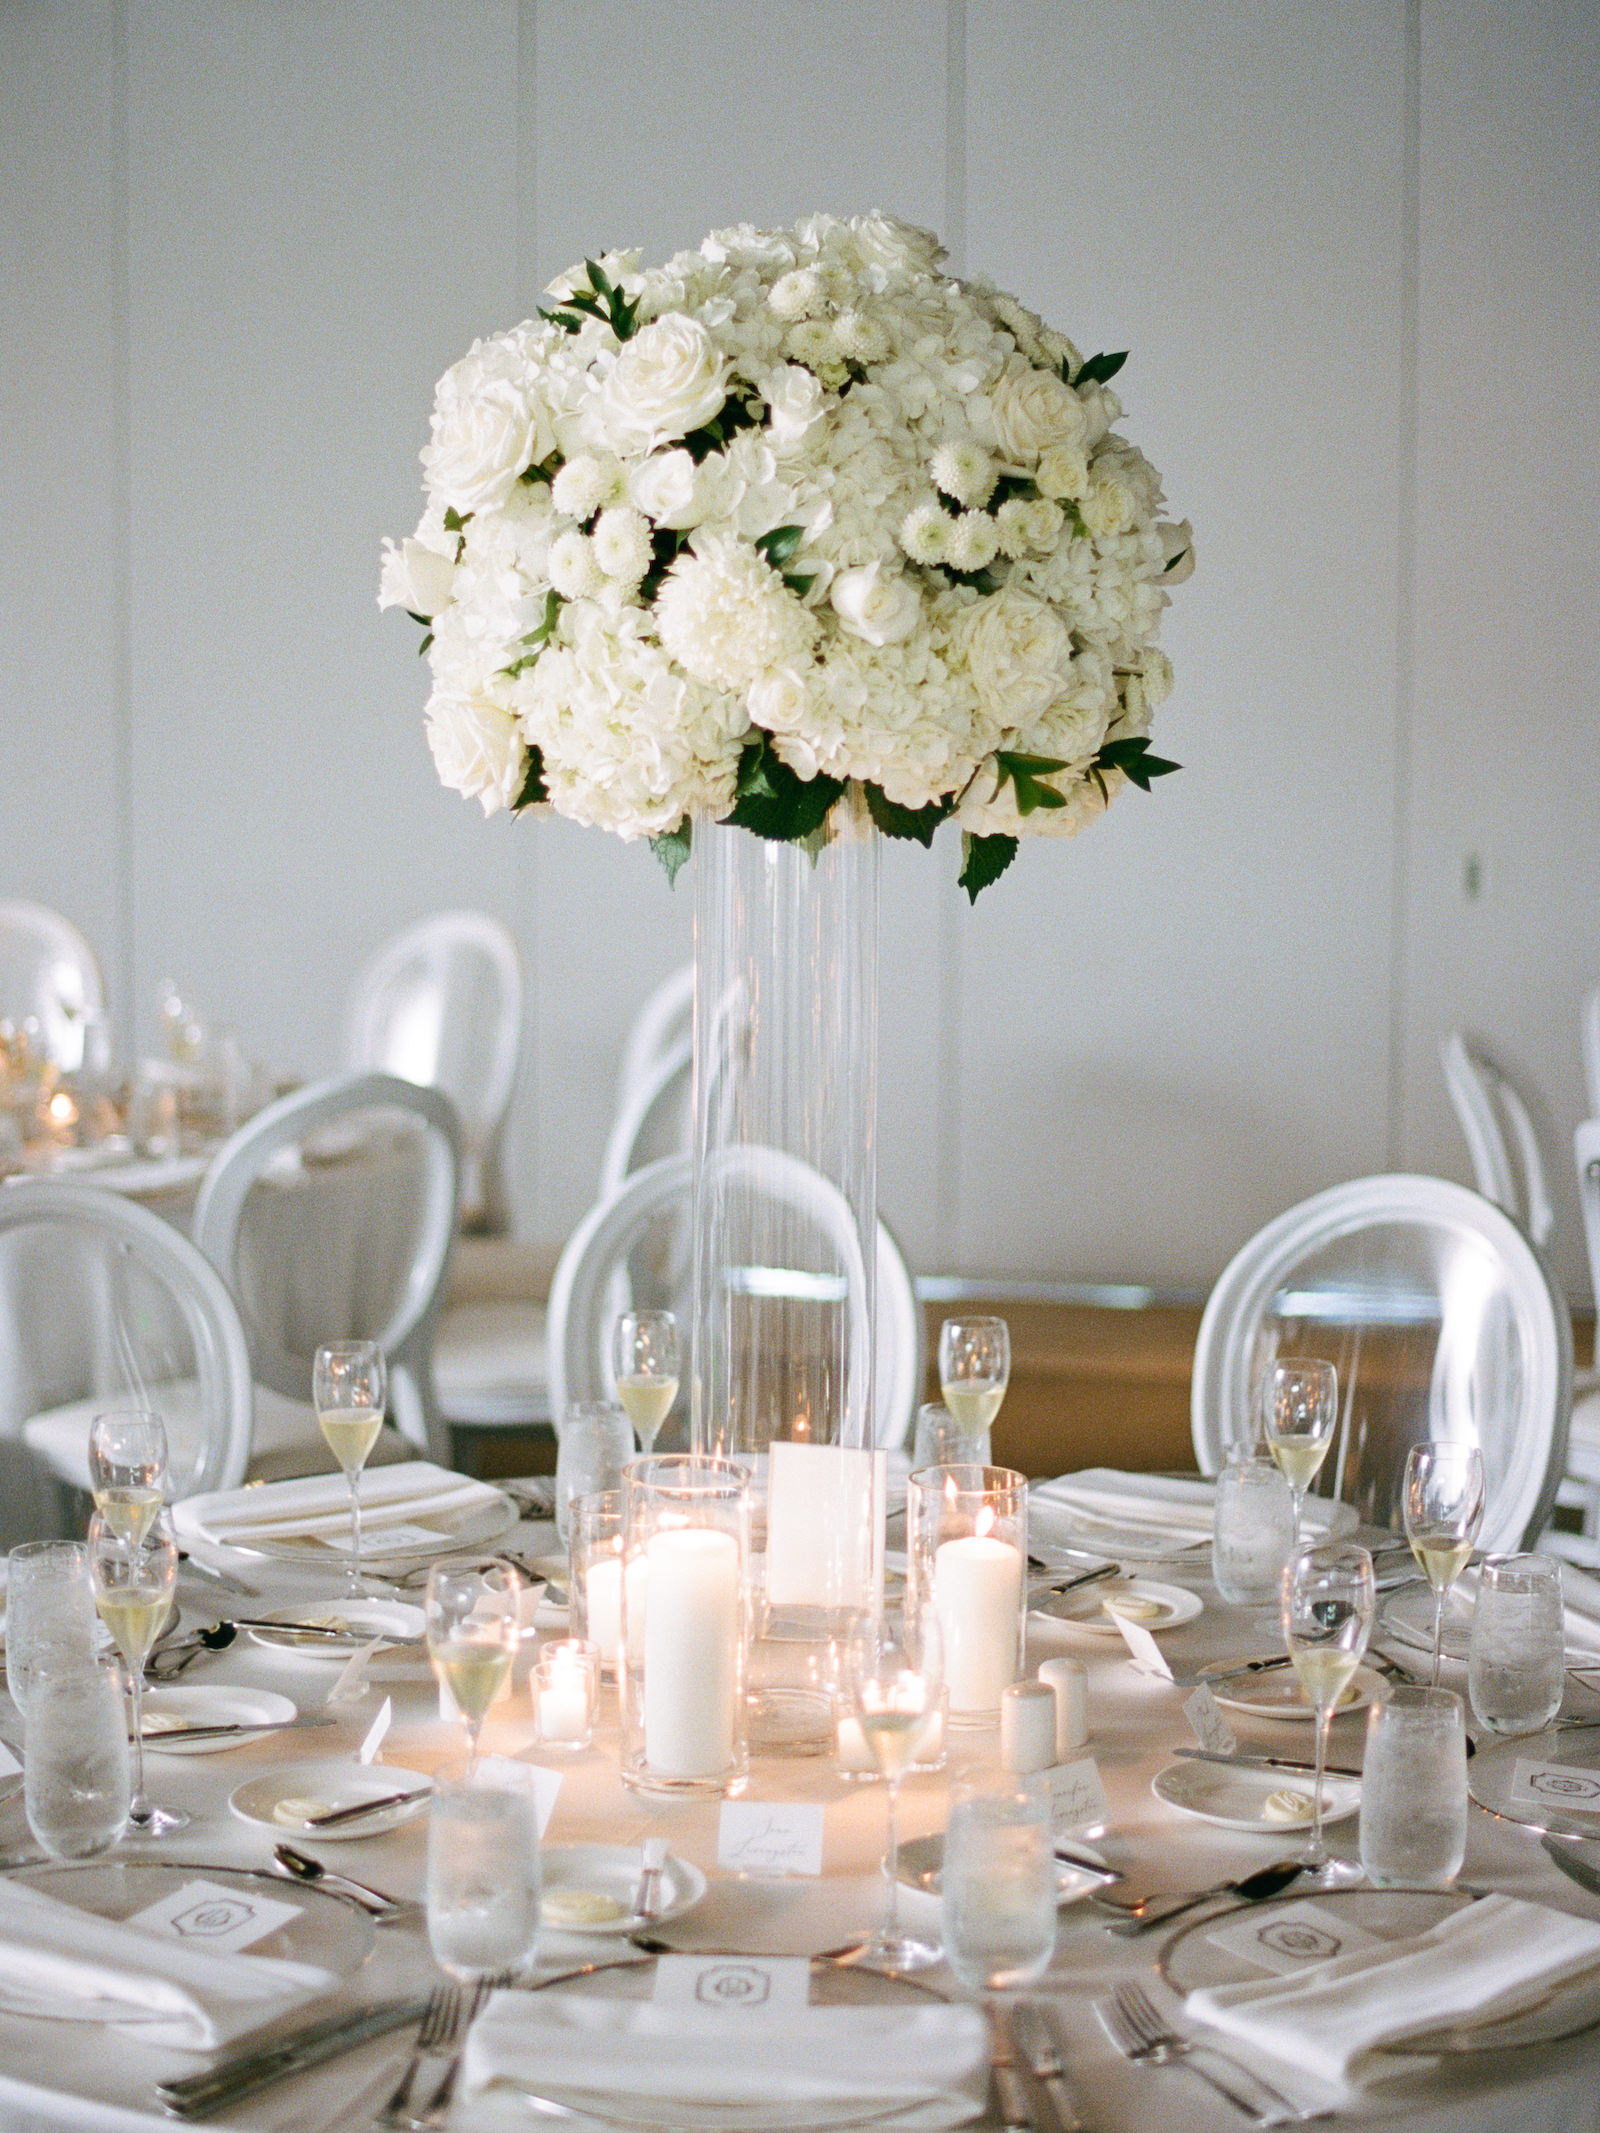 Luxurious Formal All White Wedding Reception Decor, White and Acrylic Dining Chairs, Tall Glass Cylinder Vase with Lush Crisp White Hydrangeas, Spray Roses, Candles | Tampa Bay Wedding Florist Bruce Wayne Florals | Wedding Planner Parties A'la Carte | Wedding Rentals Gabro Event Services